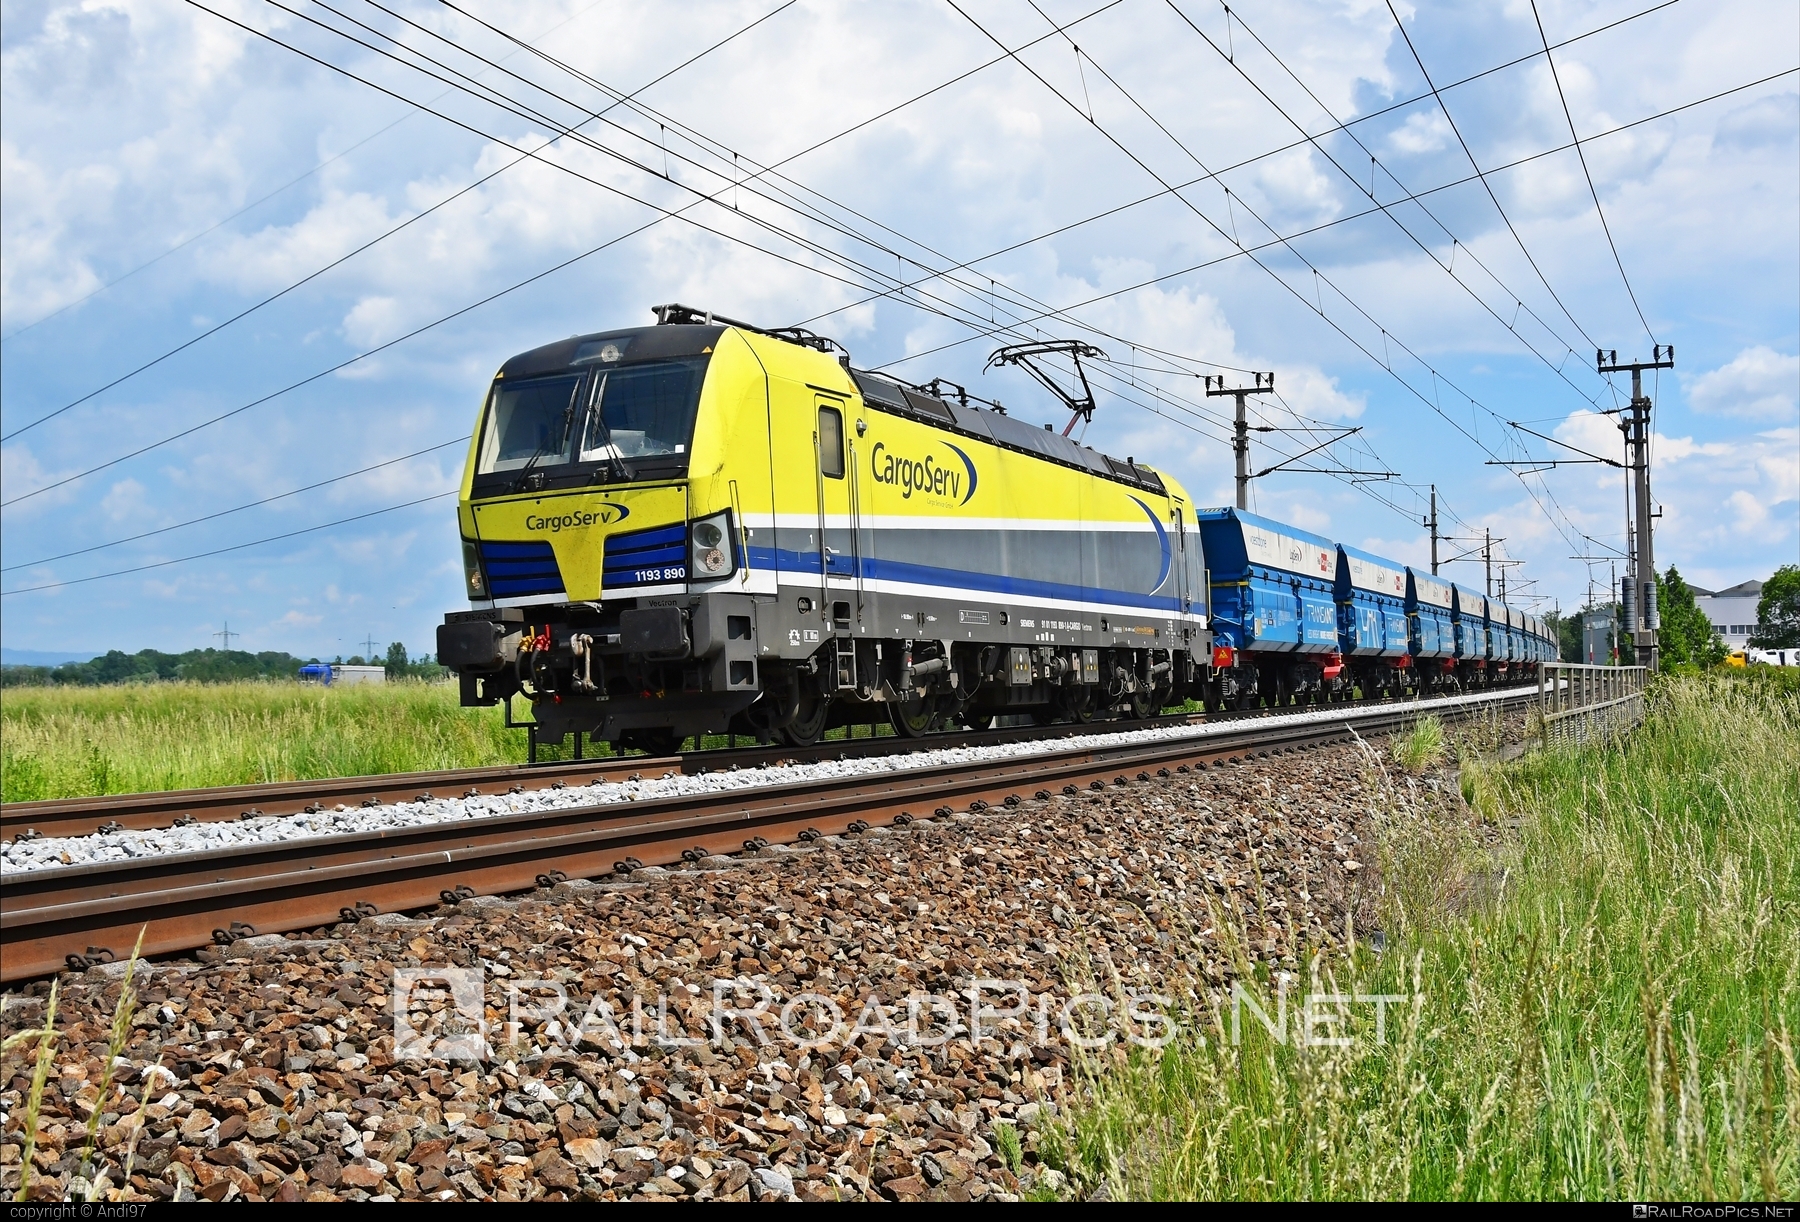 Siemens Vectron AC - 1193 890 operated by CargoServ GmbH #cargoserv #hopperwagon #siemens #siemensVectron #siemensVectronAC #vectron #vectronAC